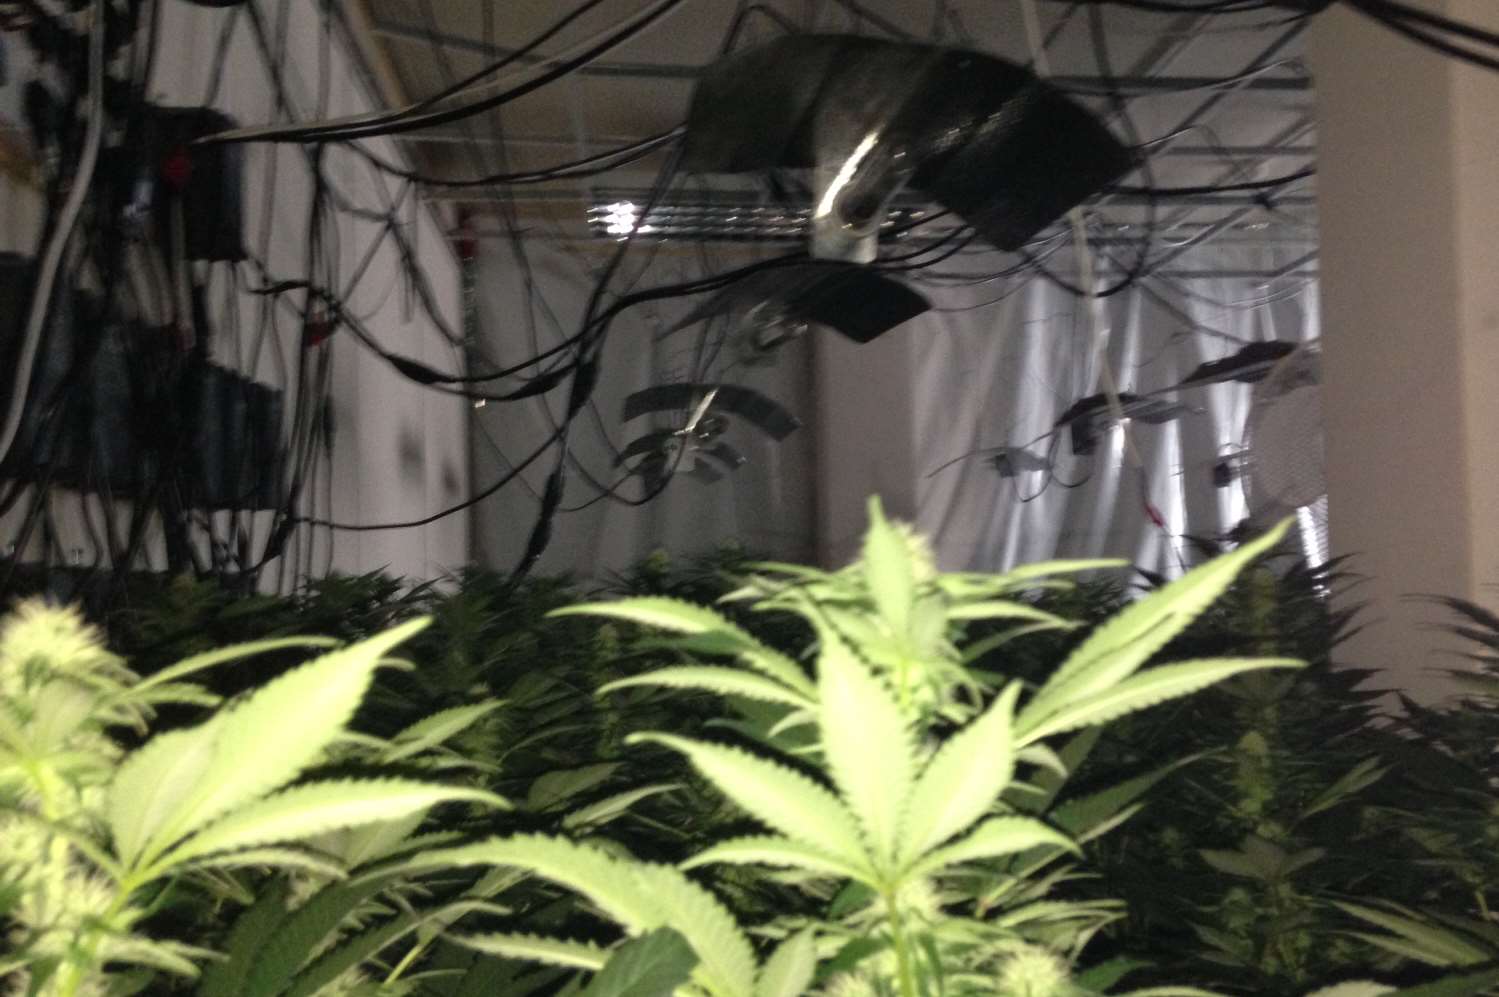 Police uncovered a cannabis farm in Dartford after a tip-off